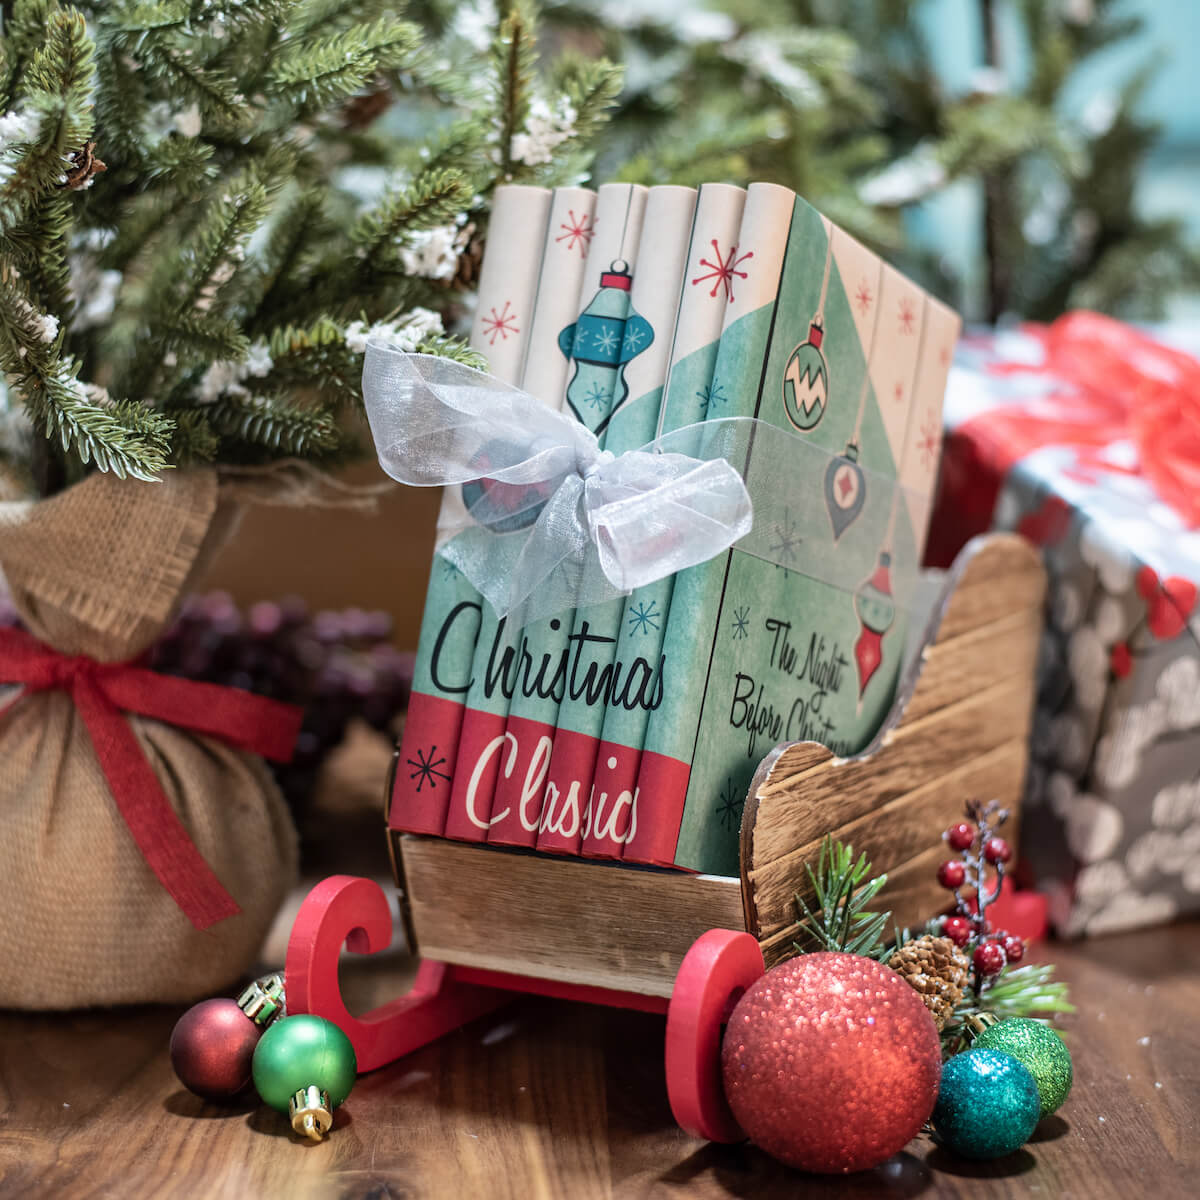 This festive set of novels is the perfect way to celebrate your favorite year-end traditions. Book Set, gift, trade, Christmas shopping.